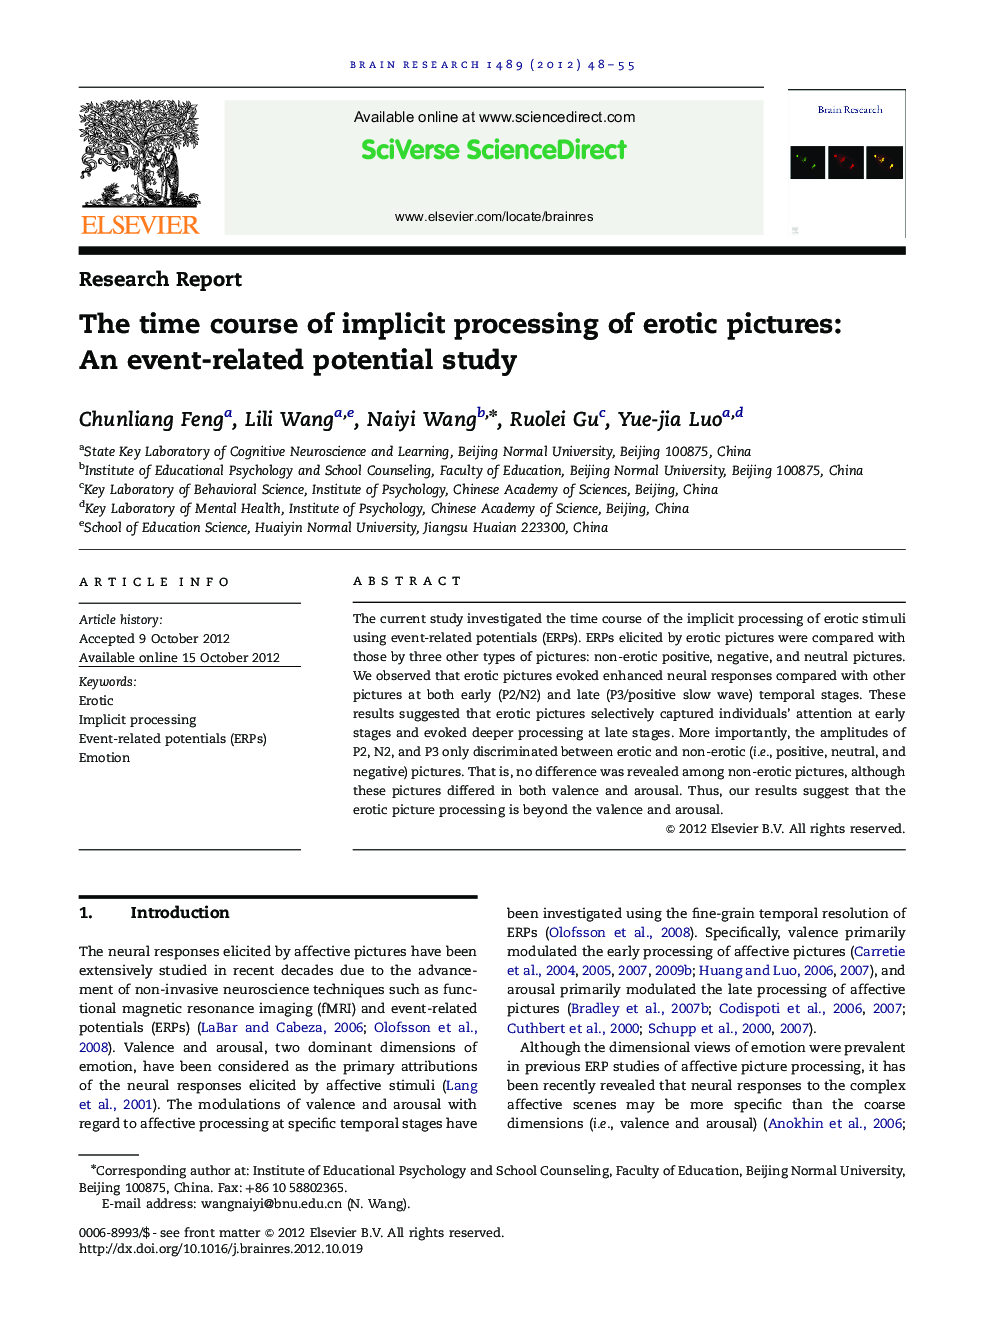 Research ReportThe time course of implicit processing of erotic pictures: An event-related potential study